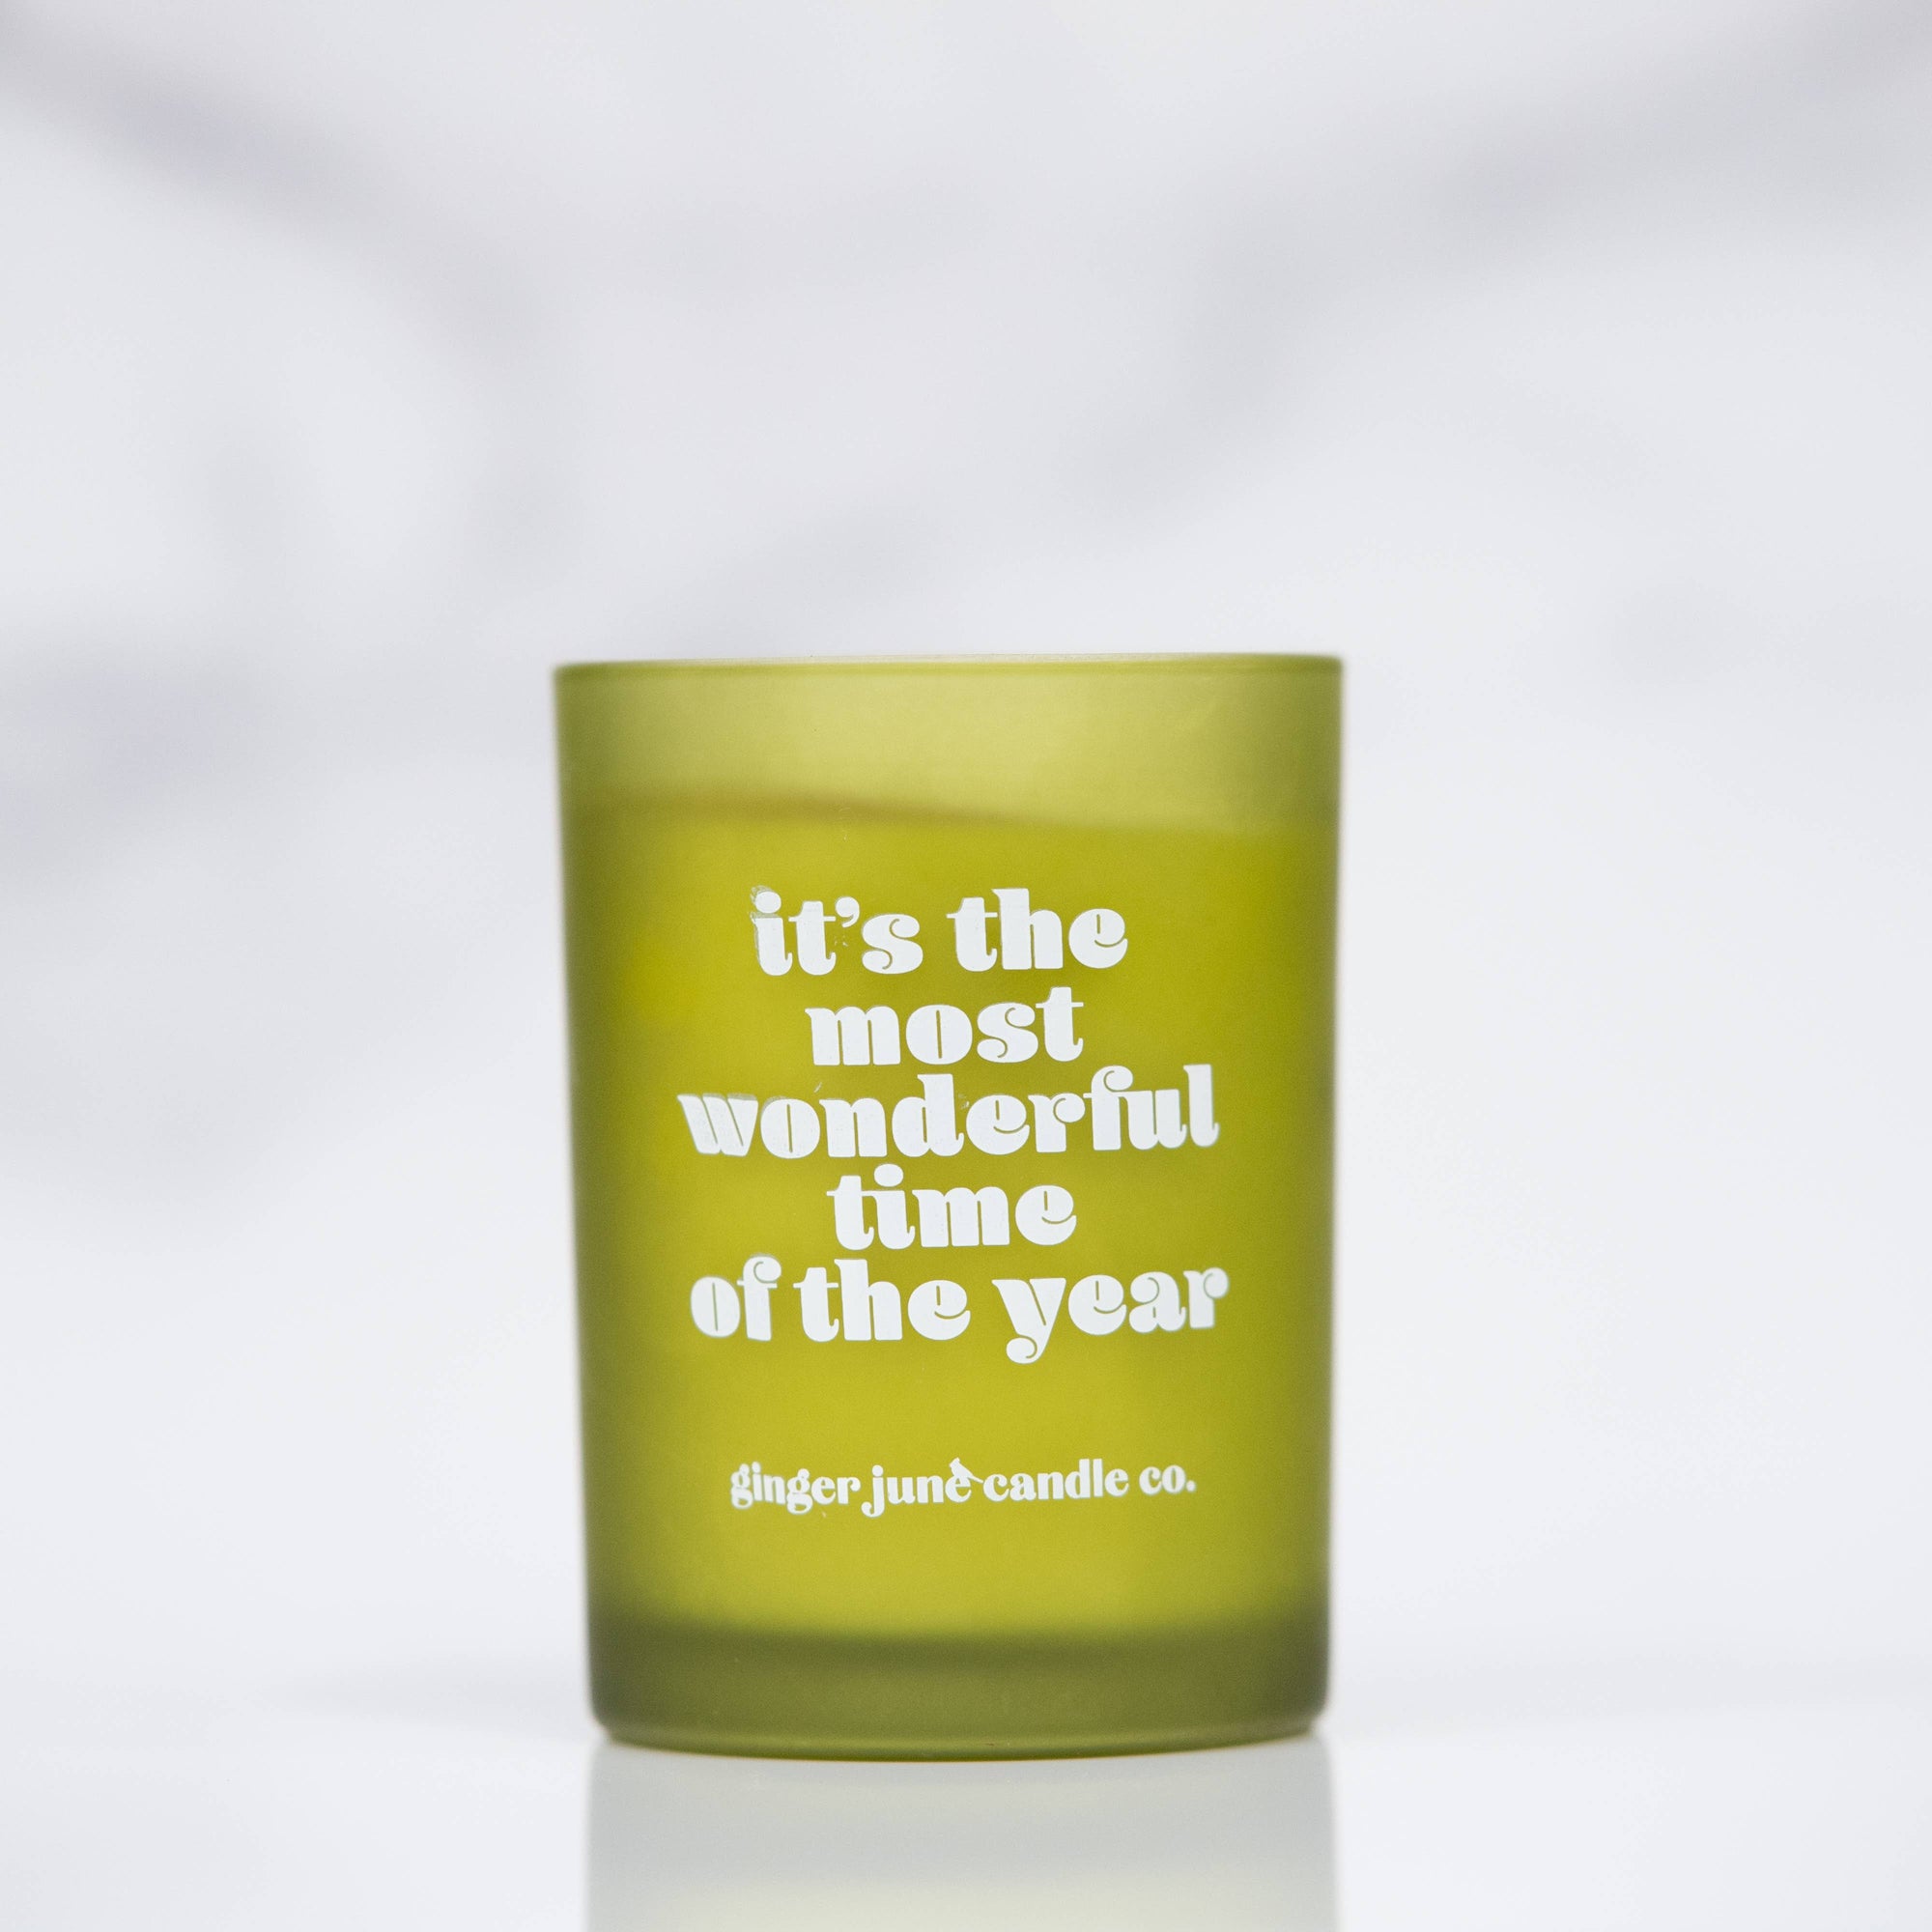 Ginger June Candle Co. IT'S THE MOST WONDERFUL TIME of the year. • tumbler candle